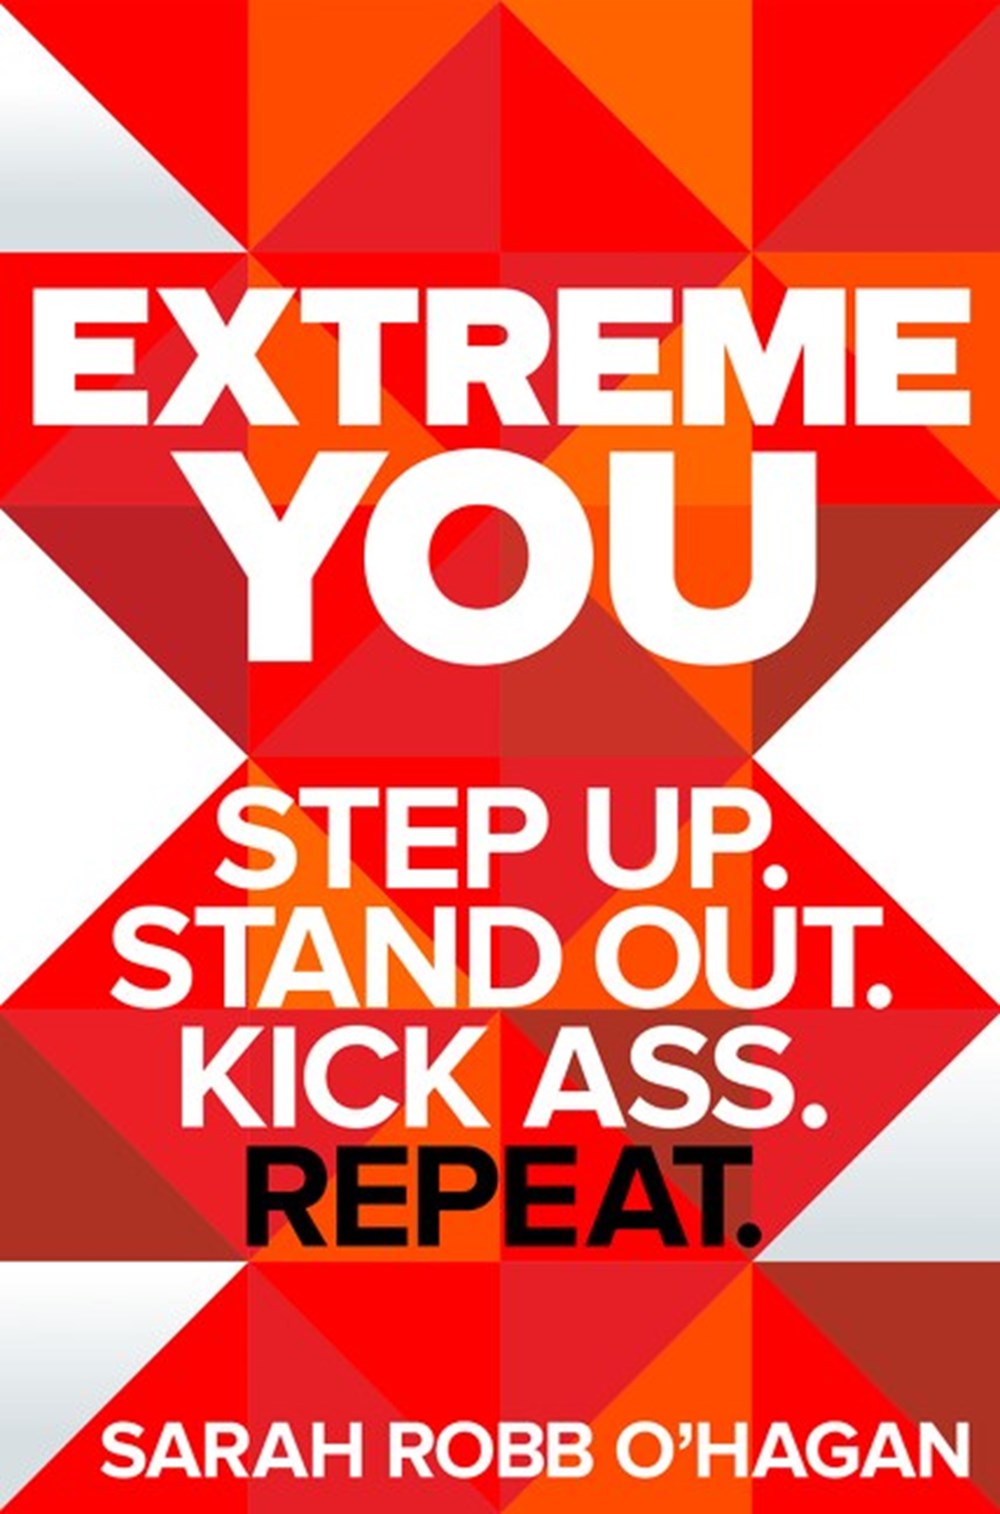 Extreme You Step Up. Stand Out. Kick Ass. Repeat.